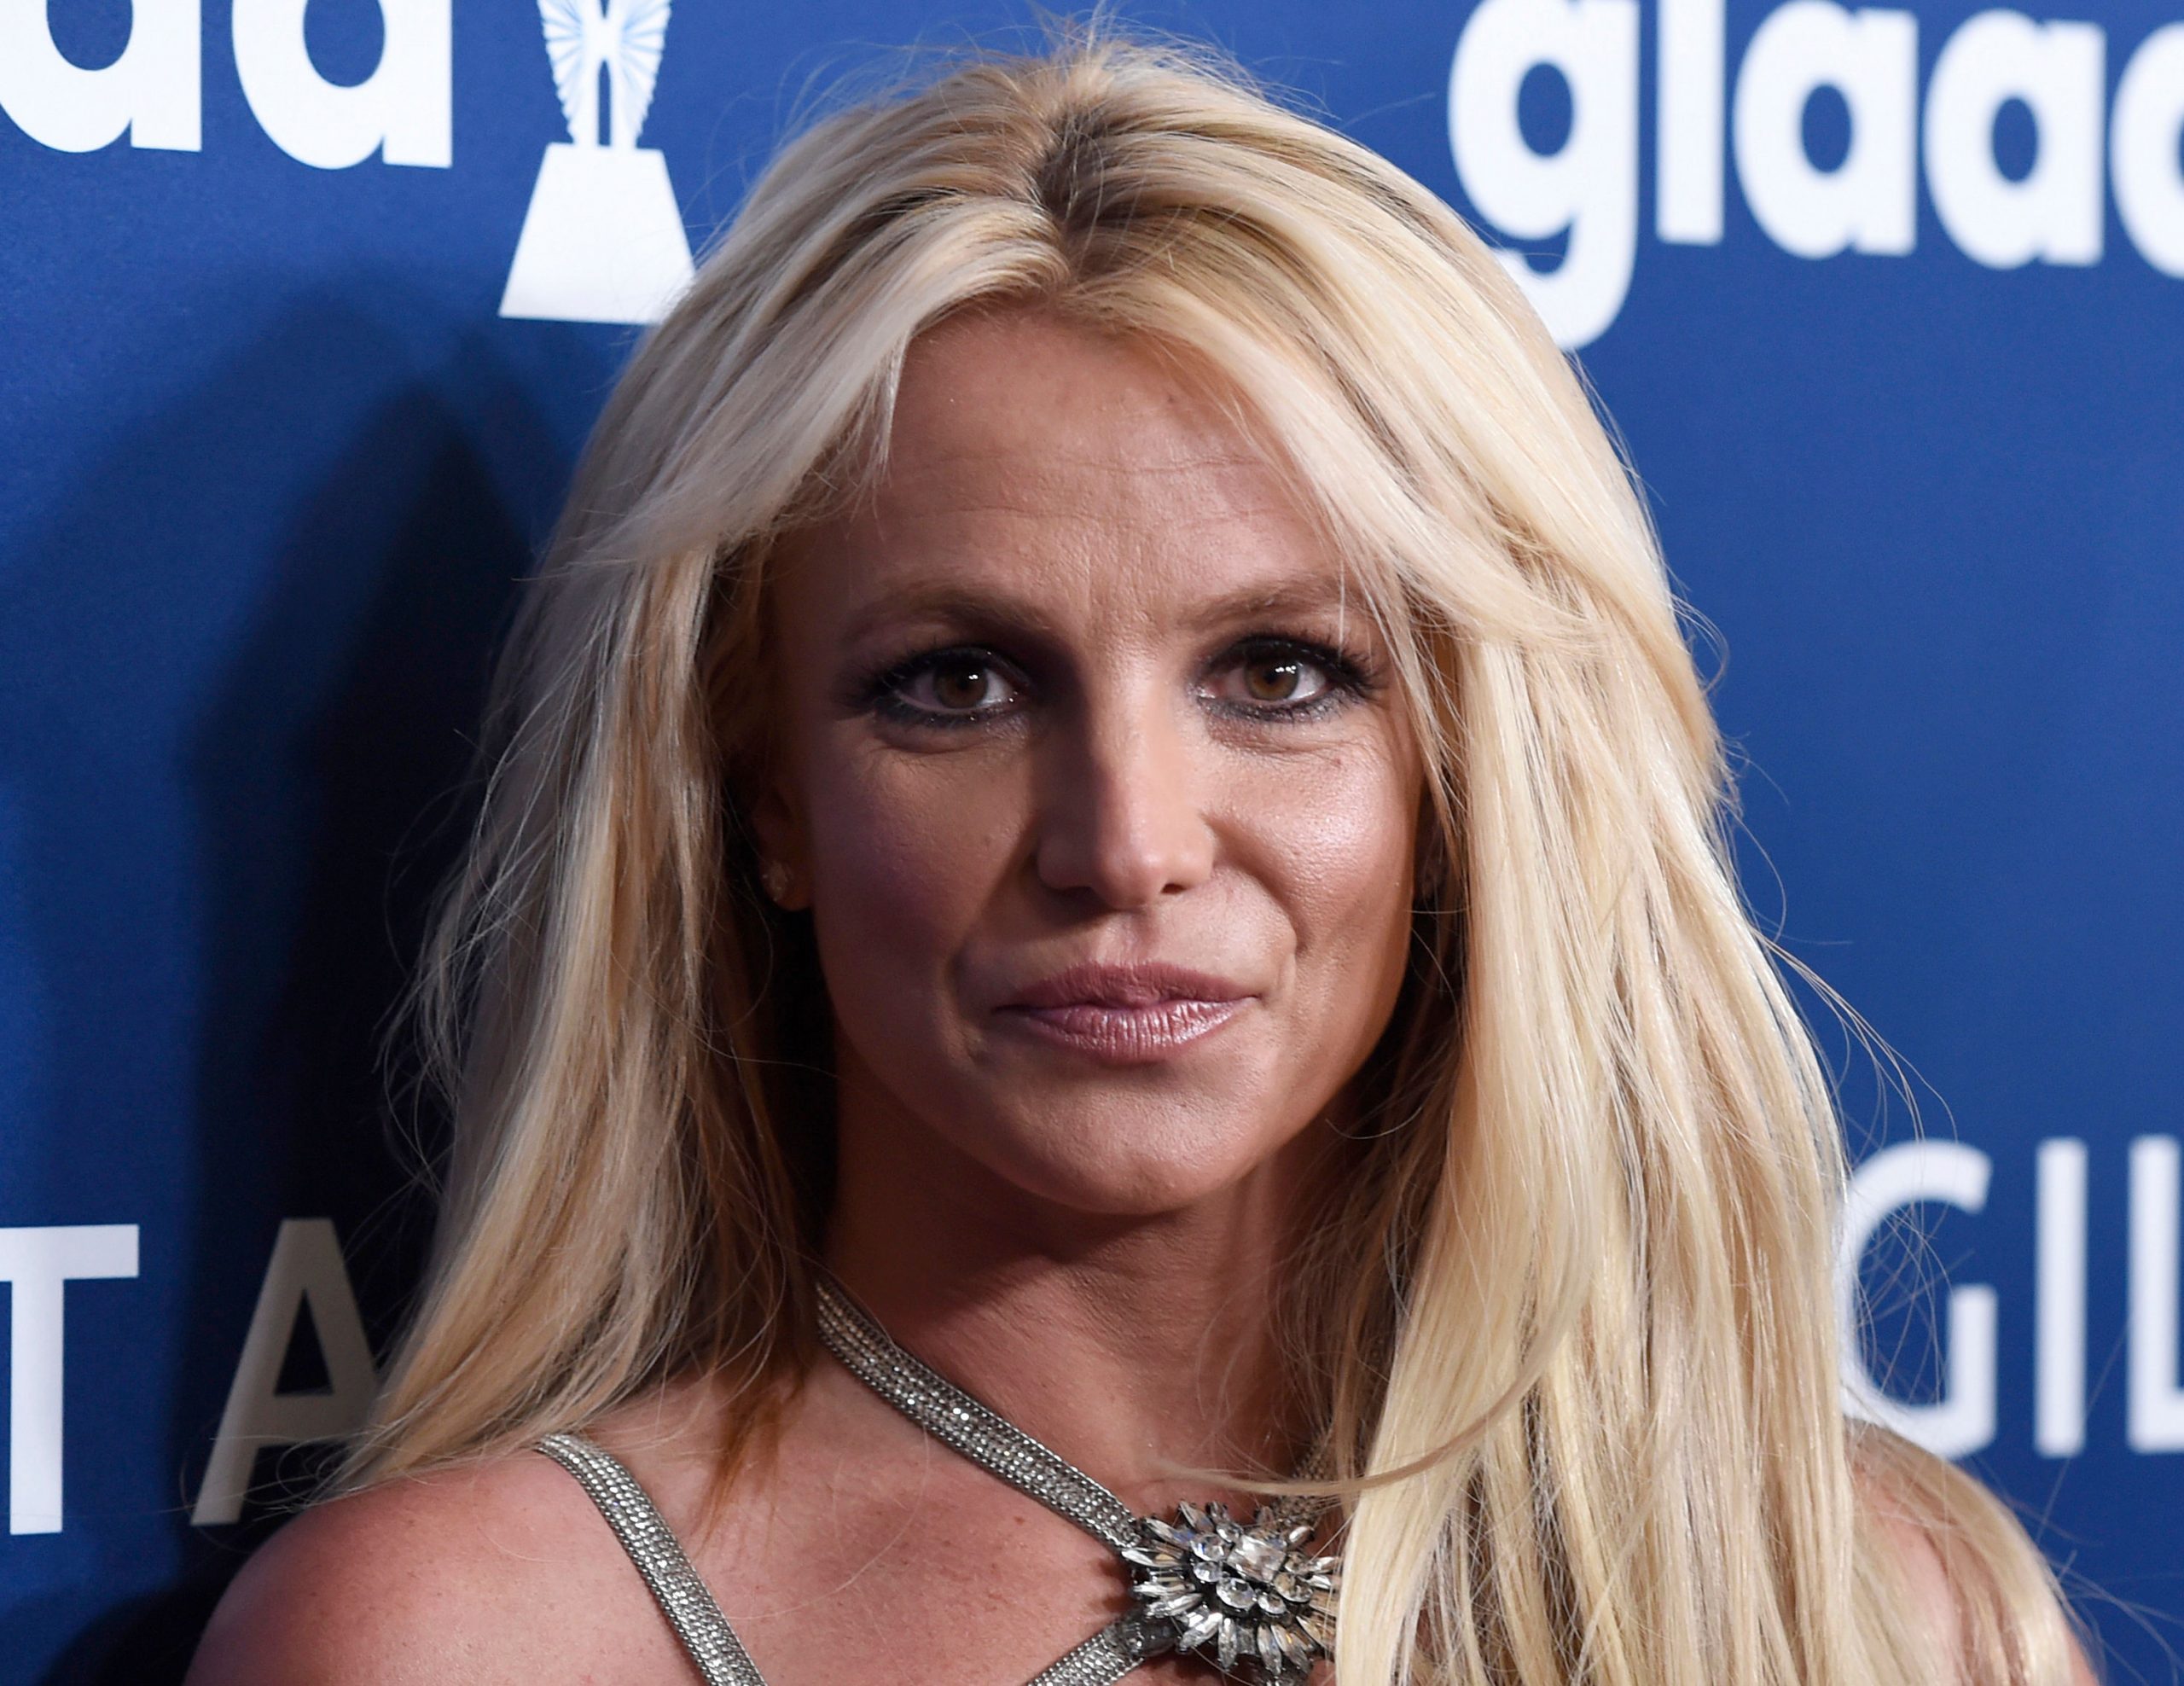 Britney Spears shares devastating news about losing ‘miracle baby’